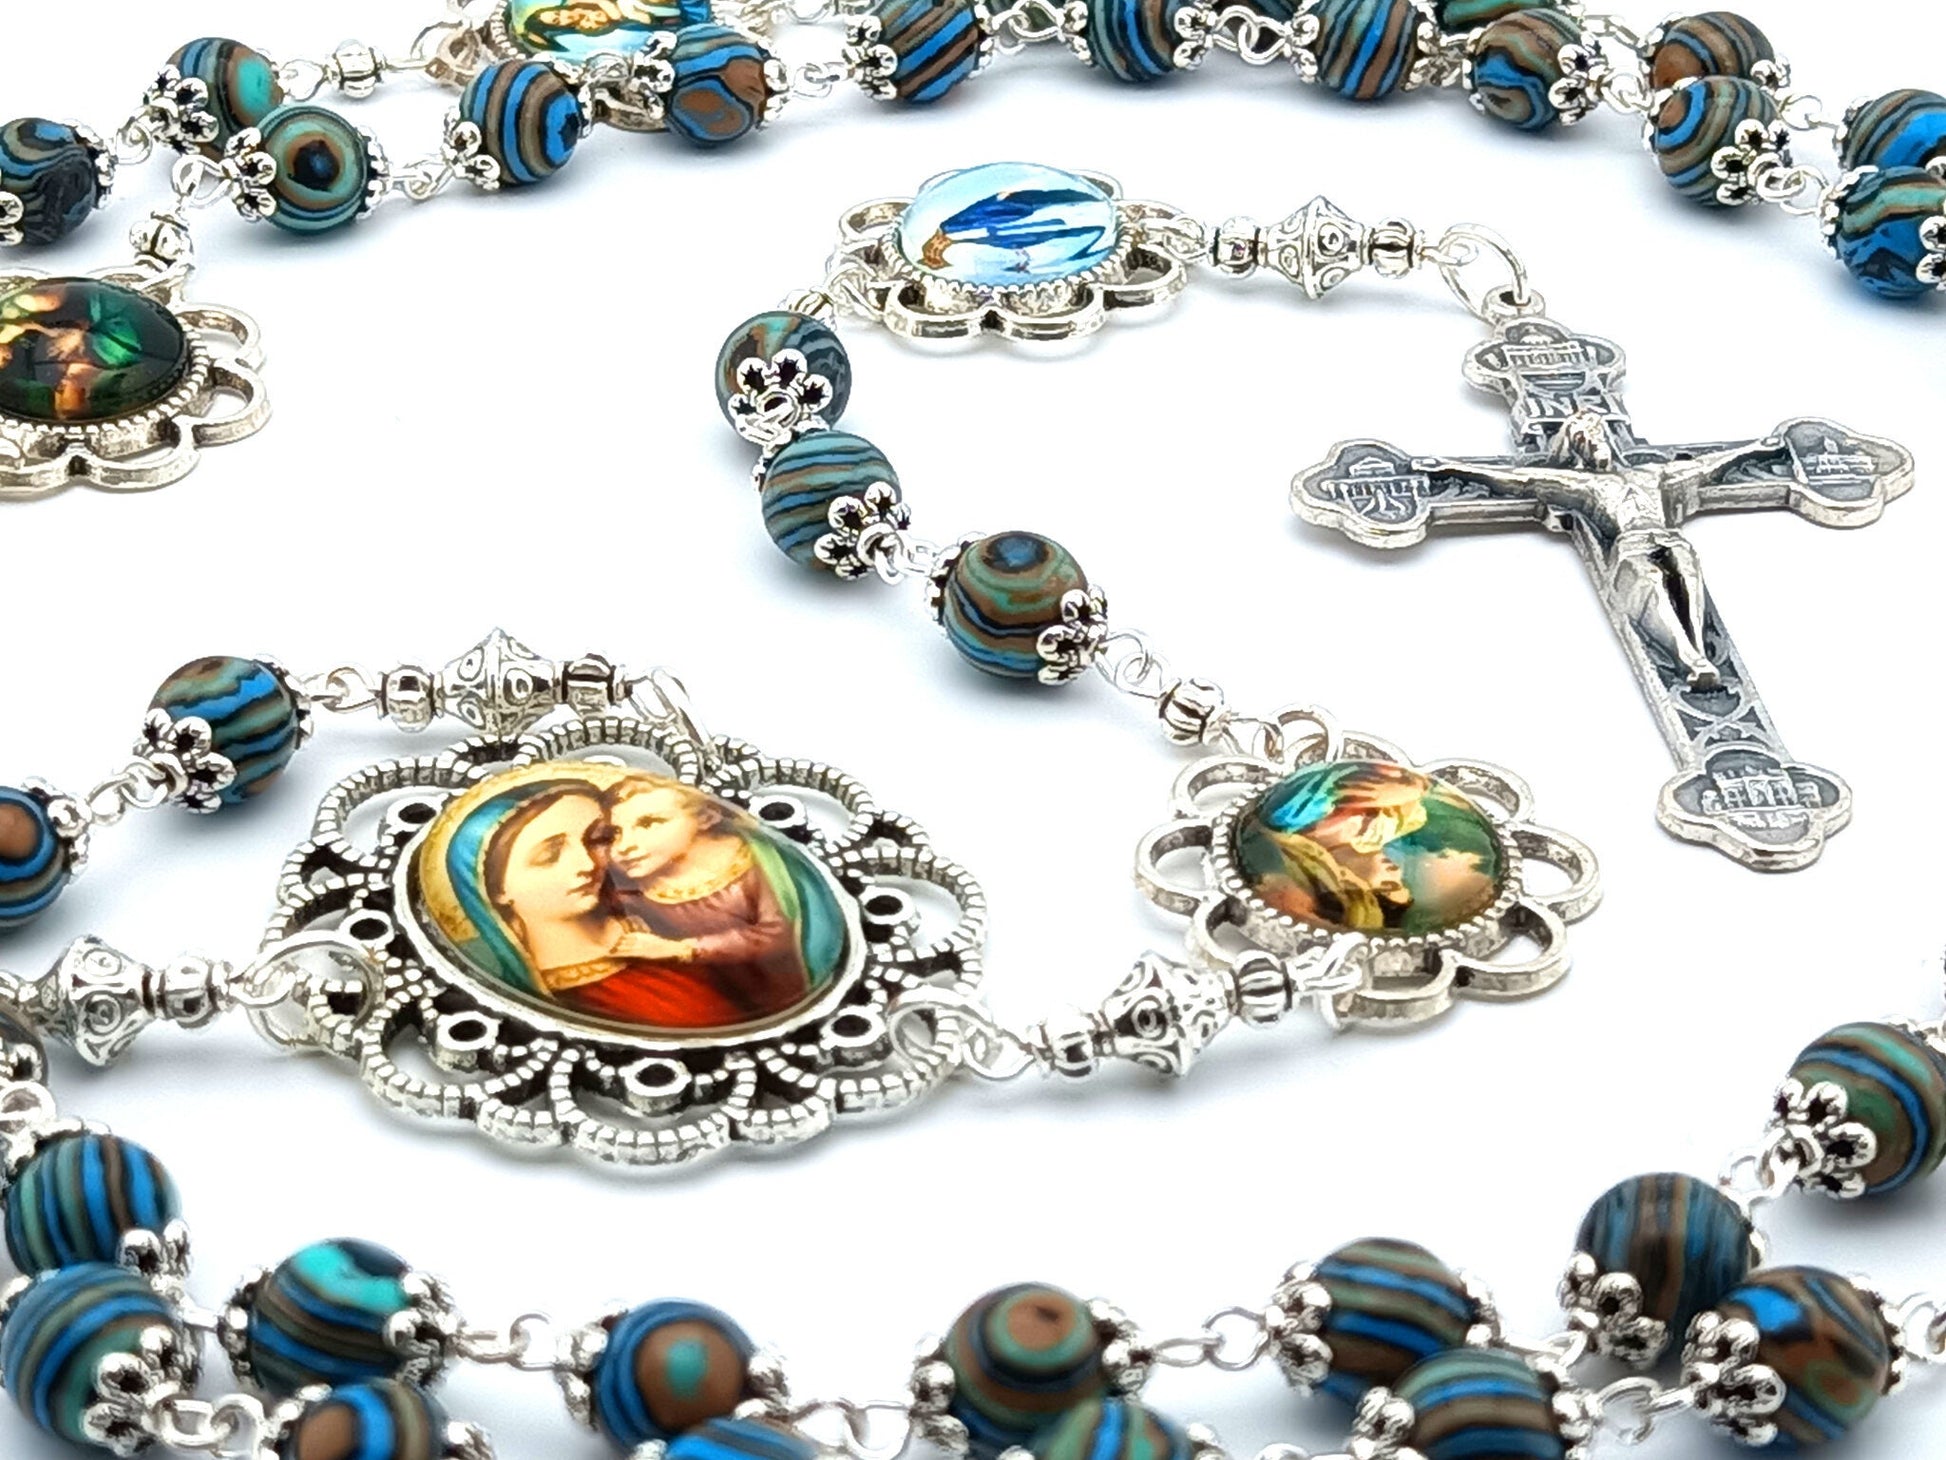 Virgin Mary unique rosary beads with malachite gemstone beads, picture pater beads and silver four basilicas crucifix and picture centre medal.